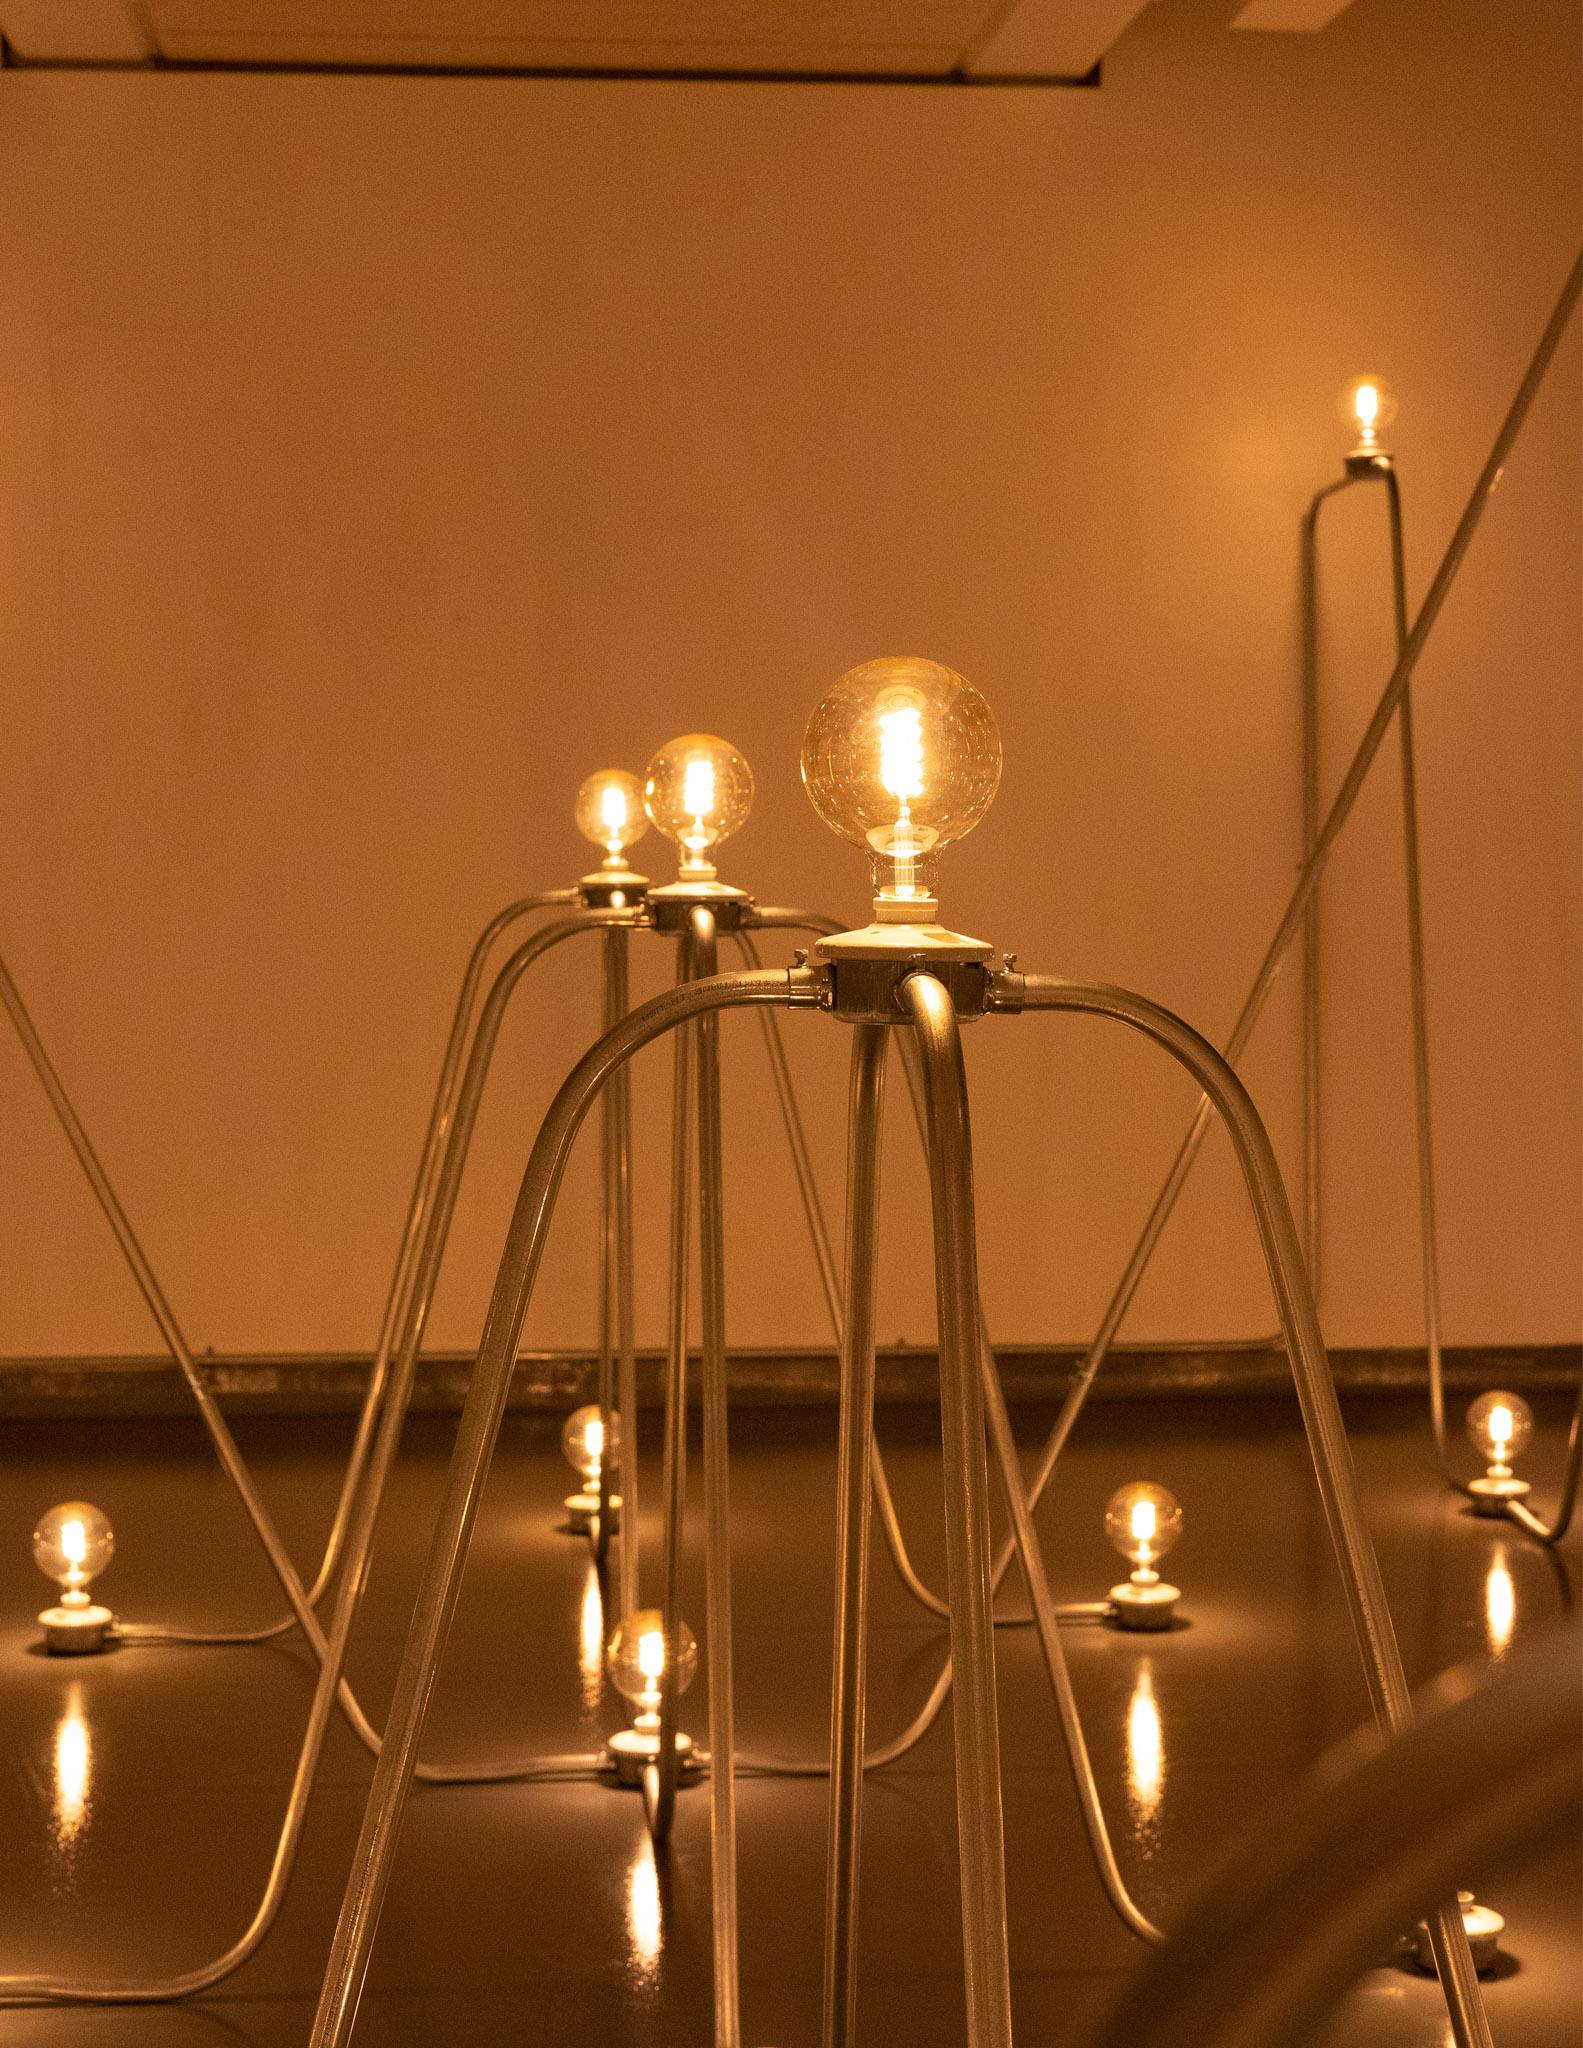 Nancy Holt's Electrical system is a network of arching conduit and lightbulbs